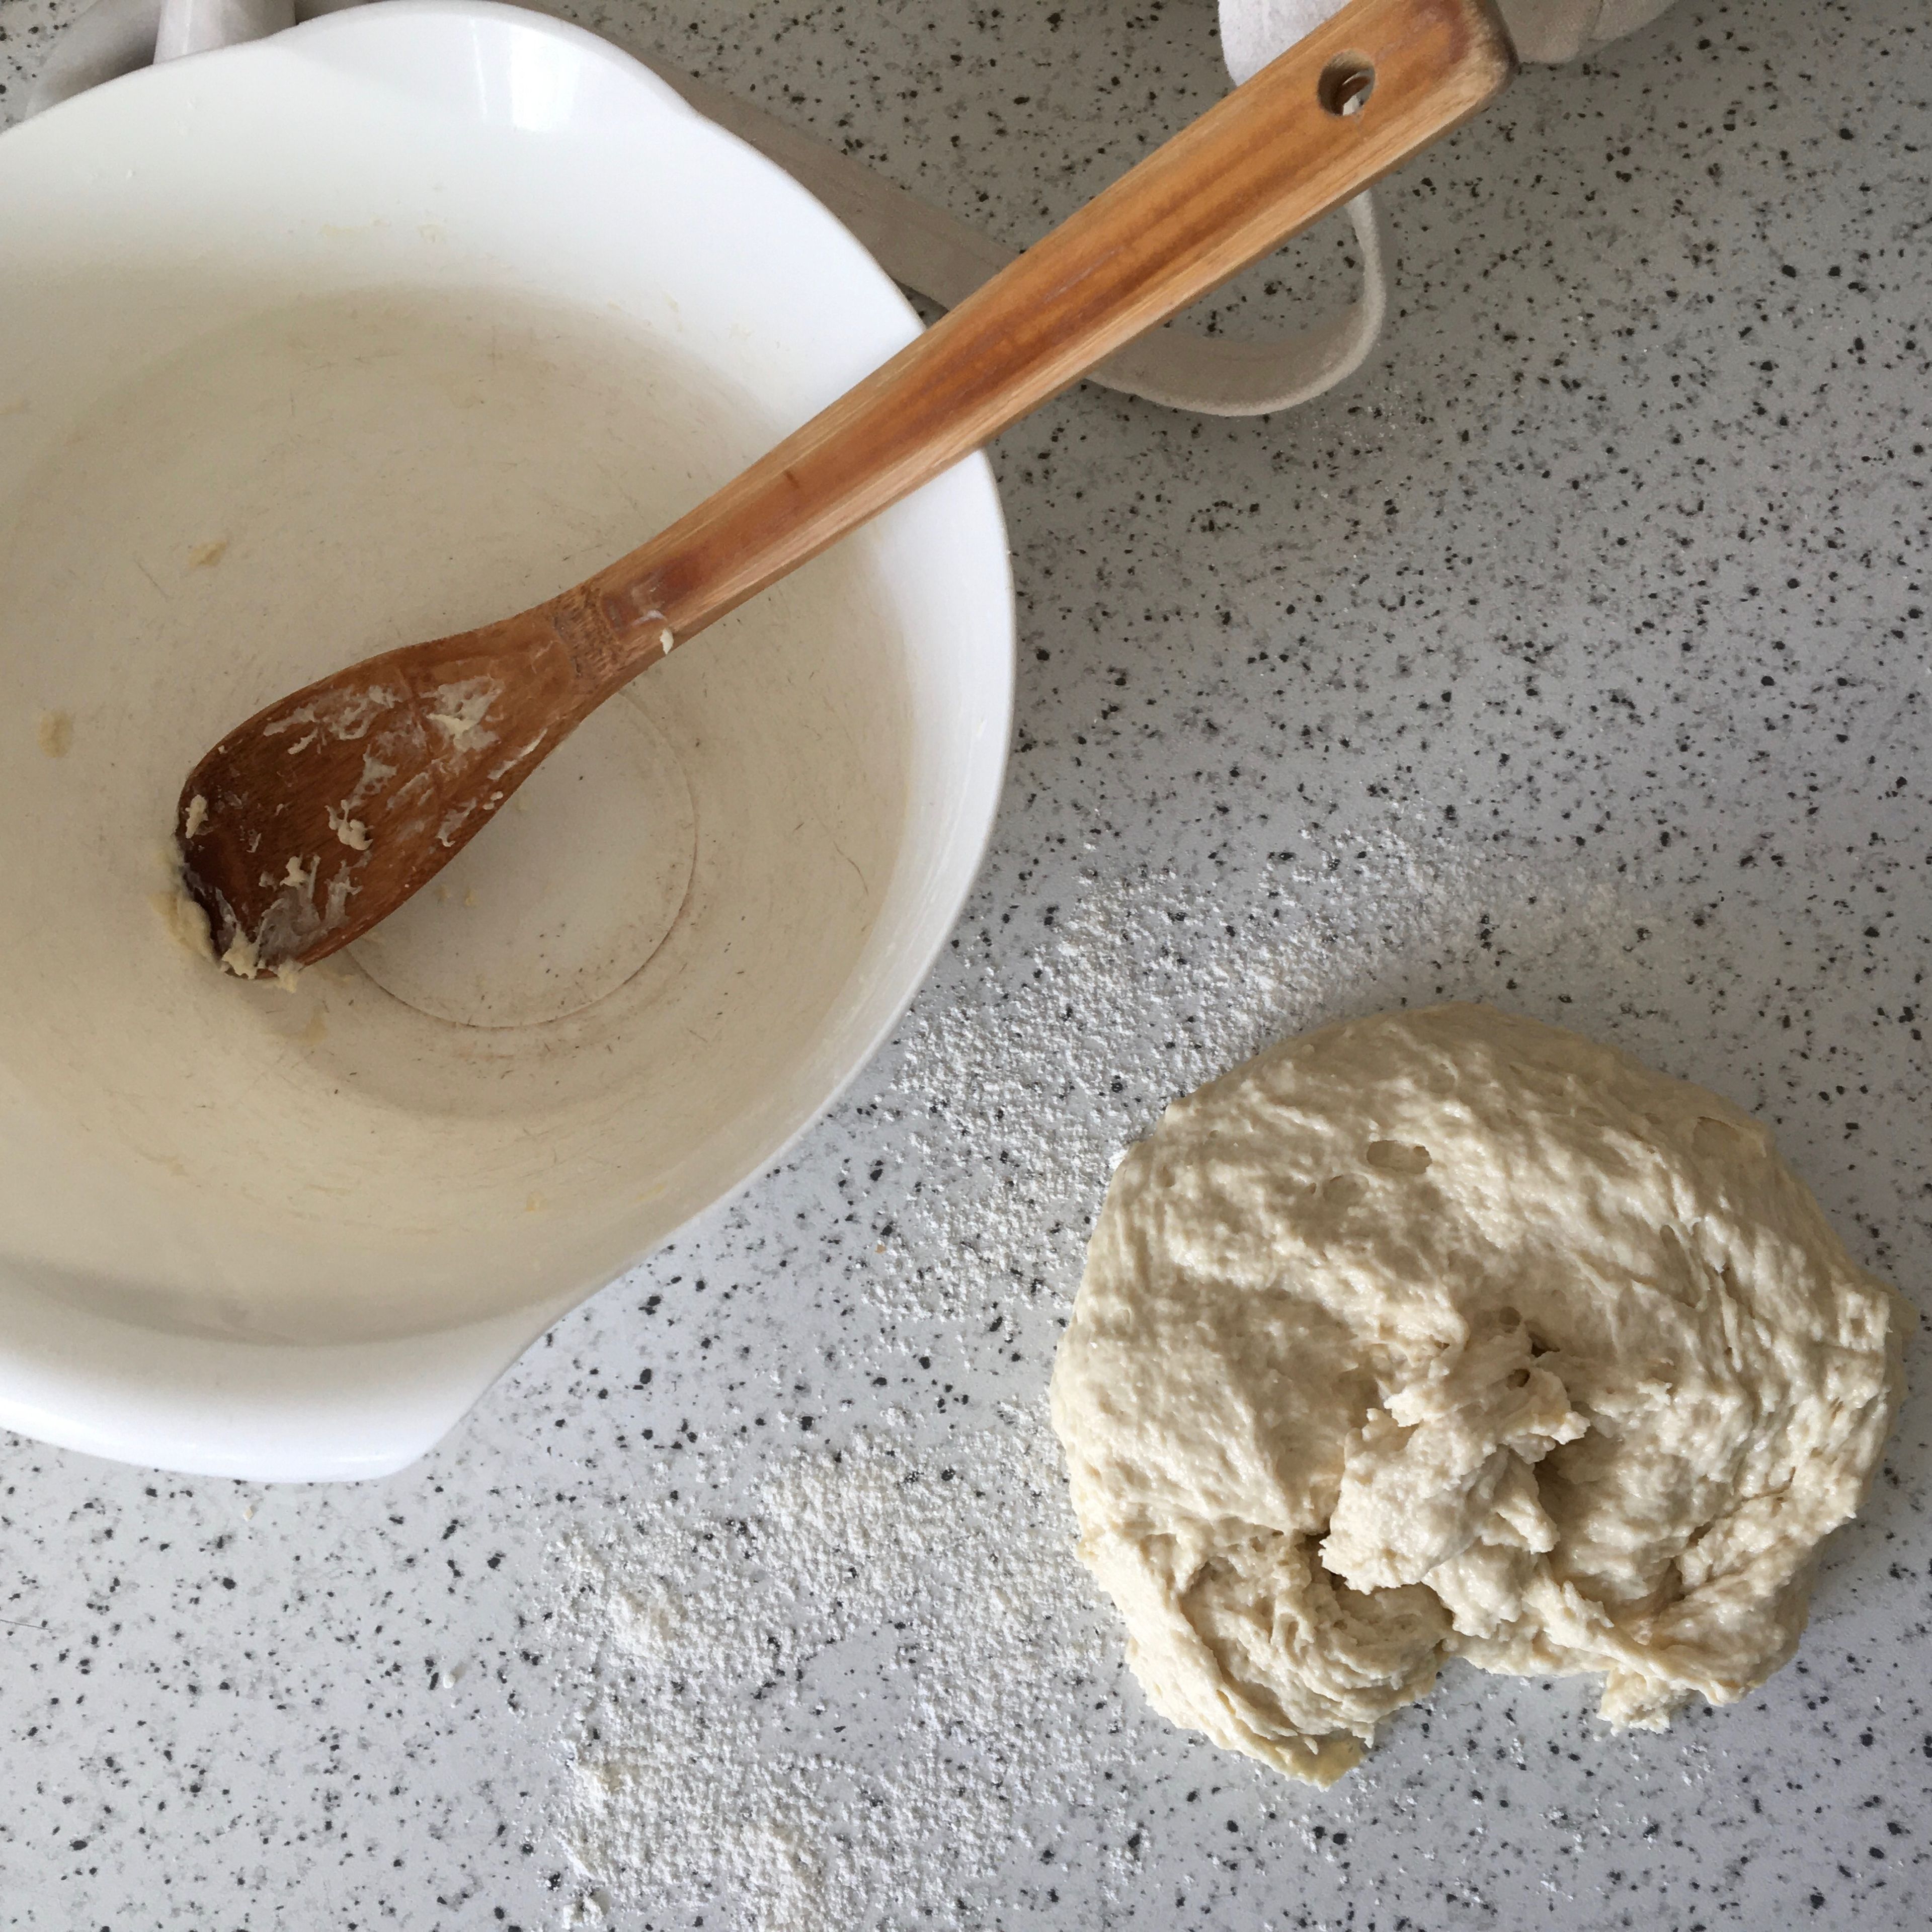 Transfer onto a clean and floured work surface. Knead for 8-10 min. until the dough gets smooth and elastic.